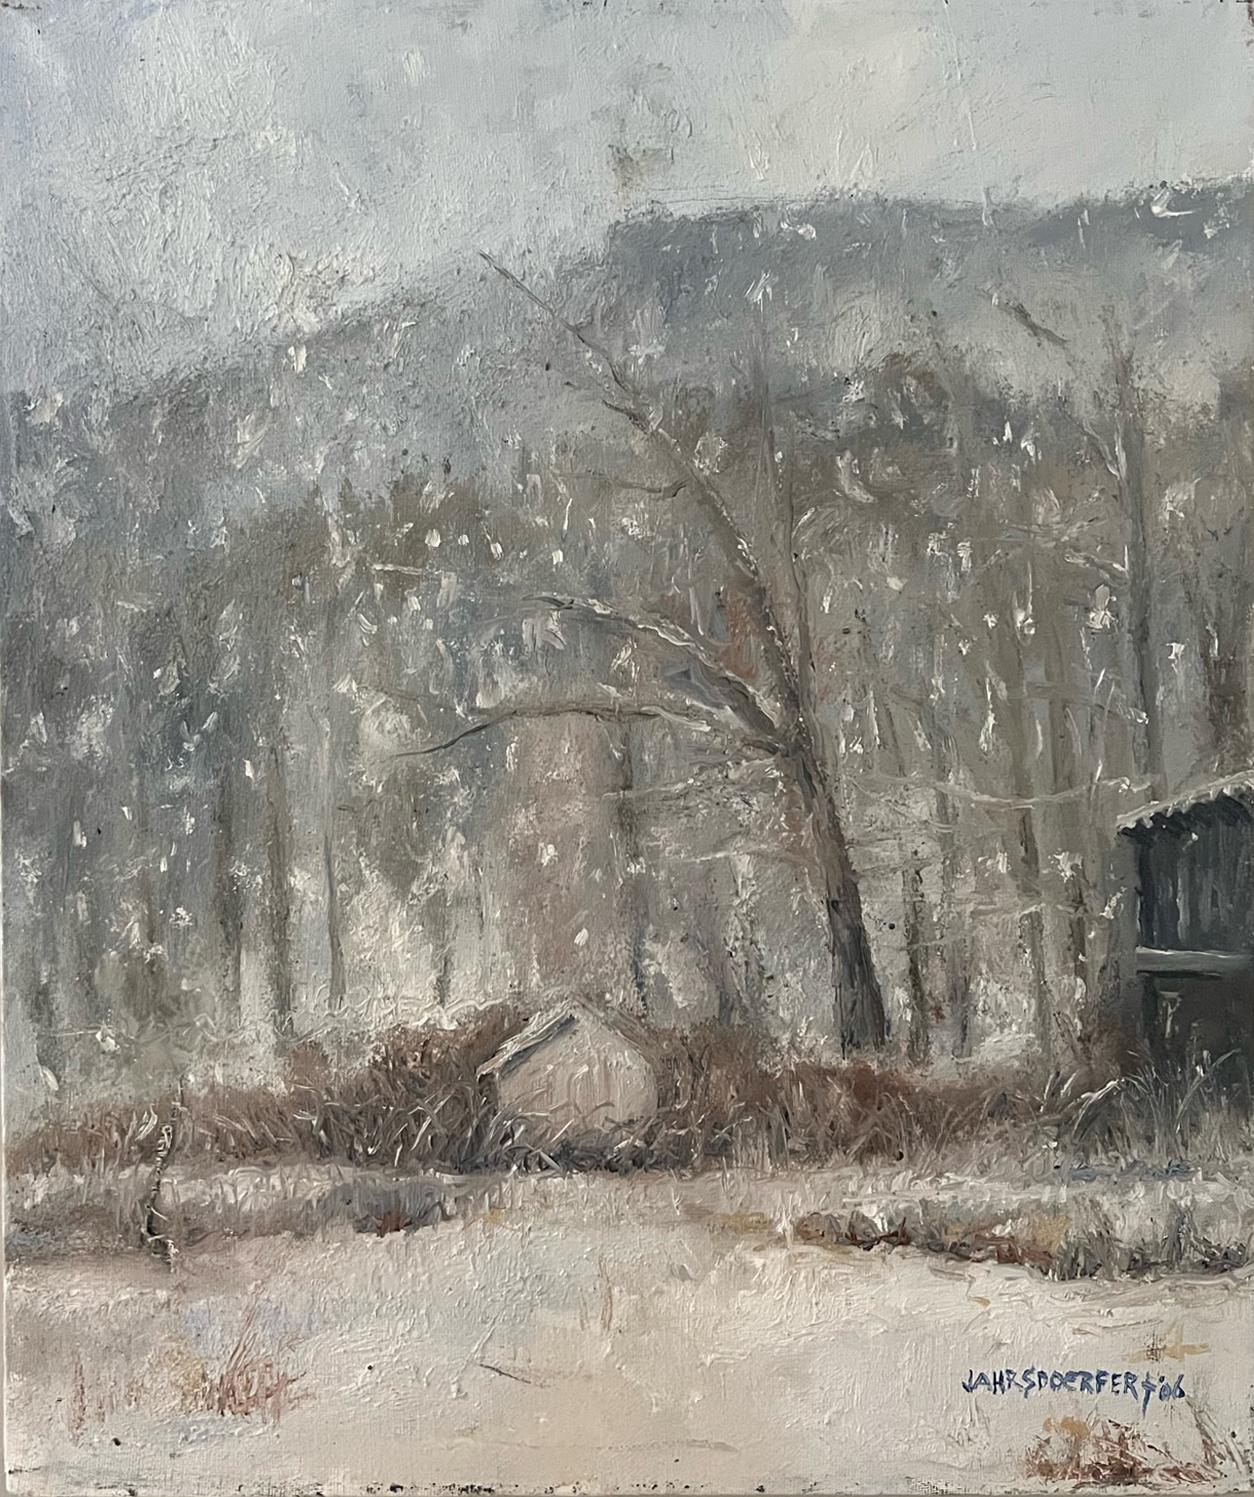 This piece, "First Snow", is a 18x15 oil painting on canvas by artist James Jahrsdoerfer featuring a snowy view into a mountain landscape. Trees catch falling snow flakes behind an old barn while looming mountains appear through the